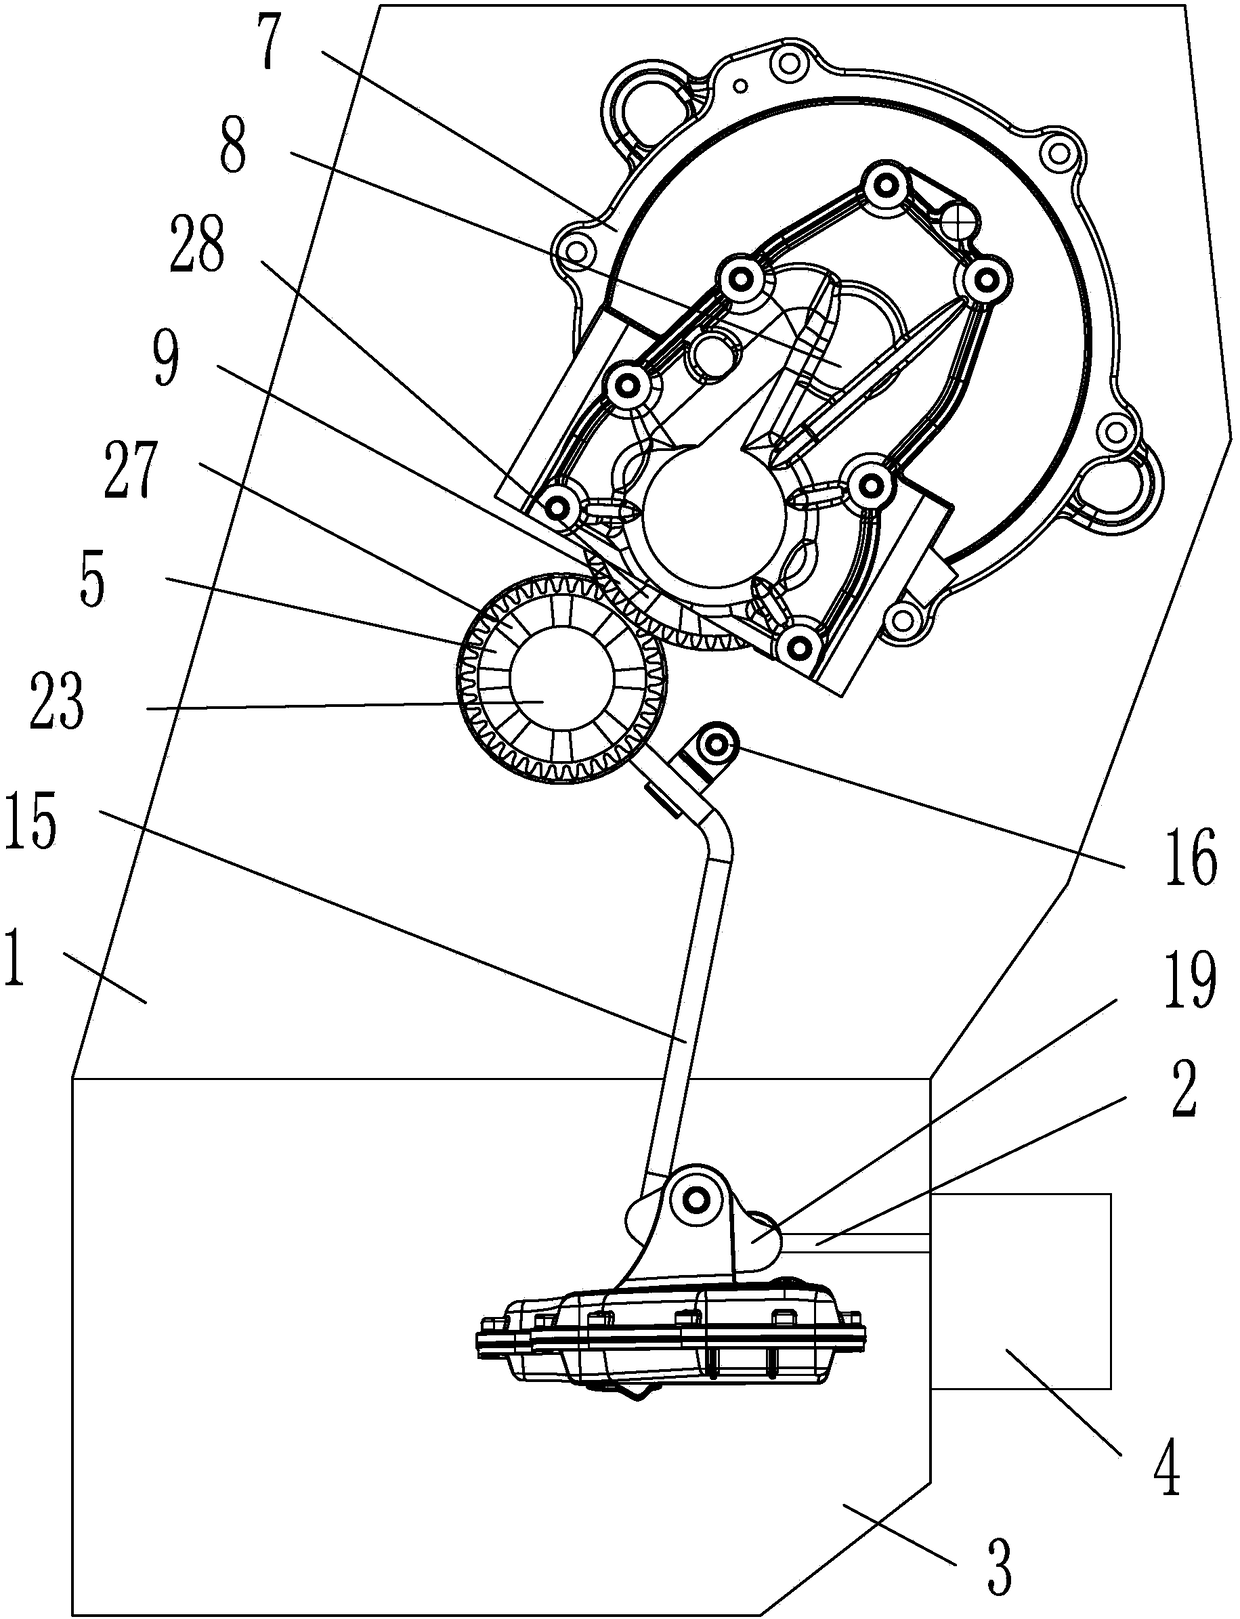 Lubrication structure of dual clutch hybrid transmission